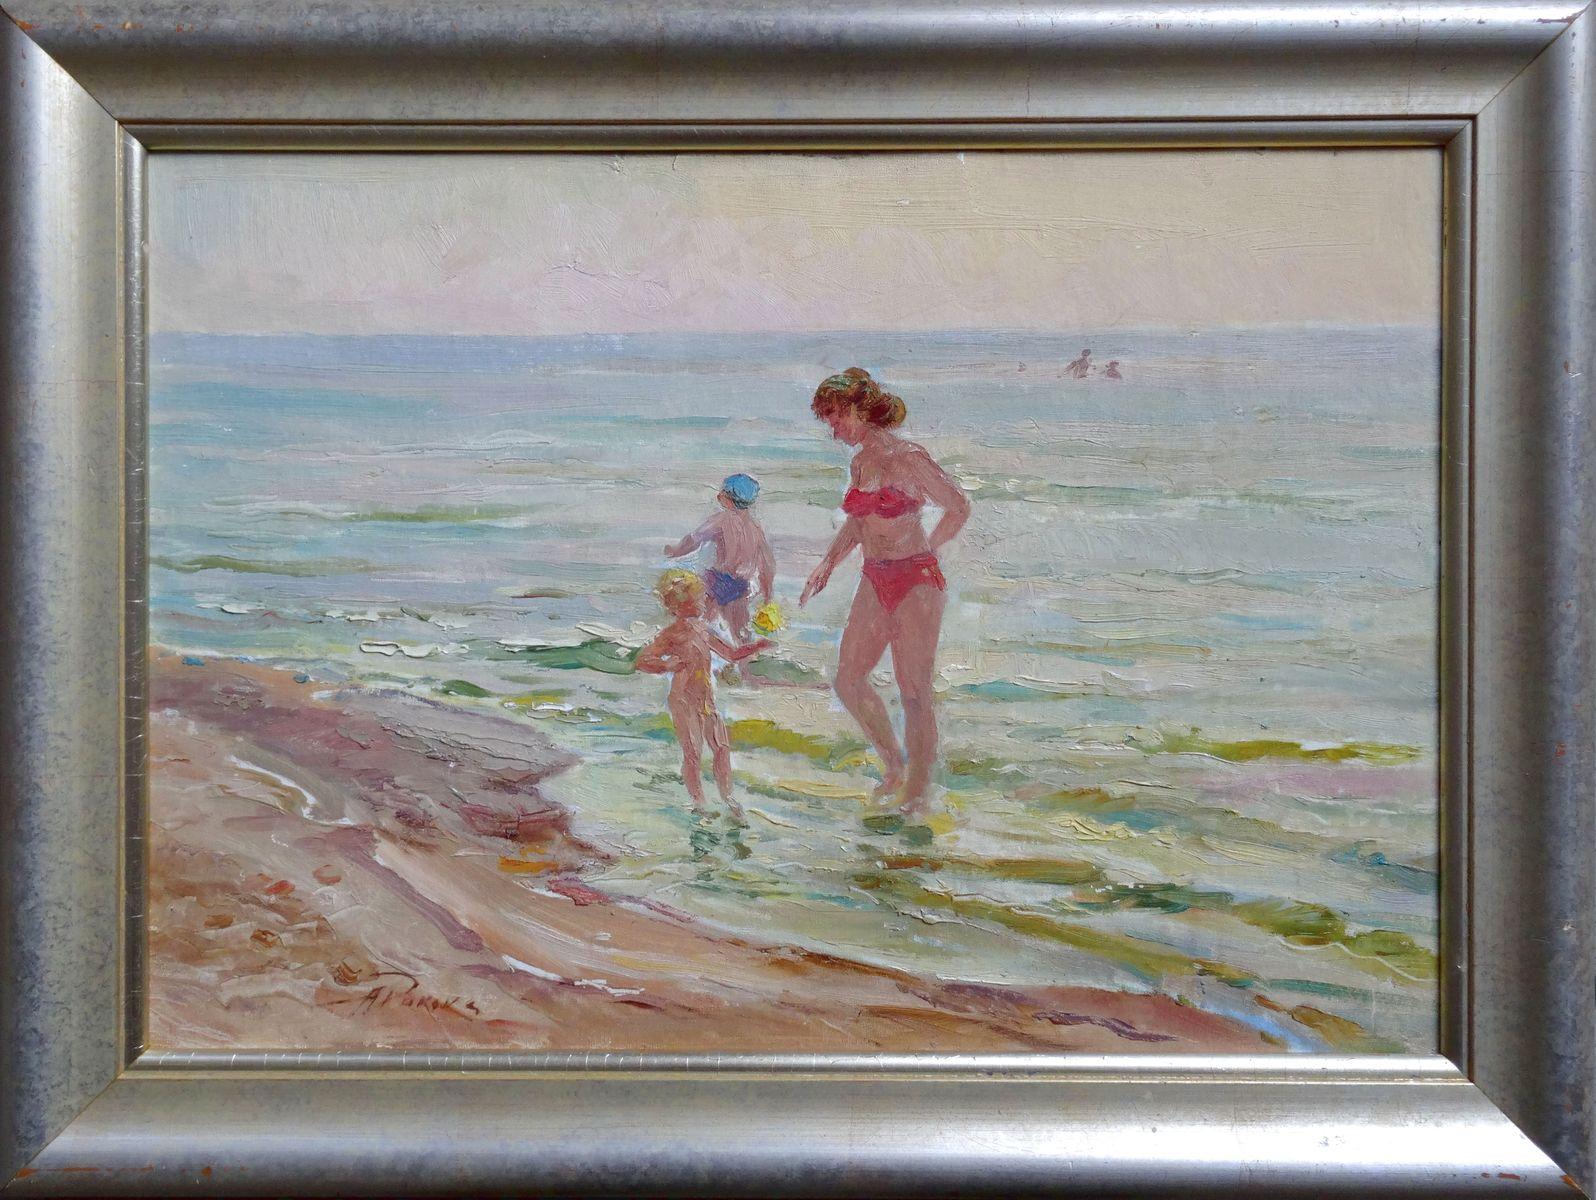 The beach. Oil on canvas and board, 35x50 cm - Impressionist Painting by Arnolds Pankoks